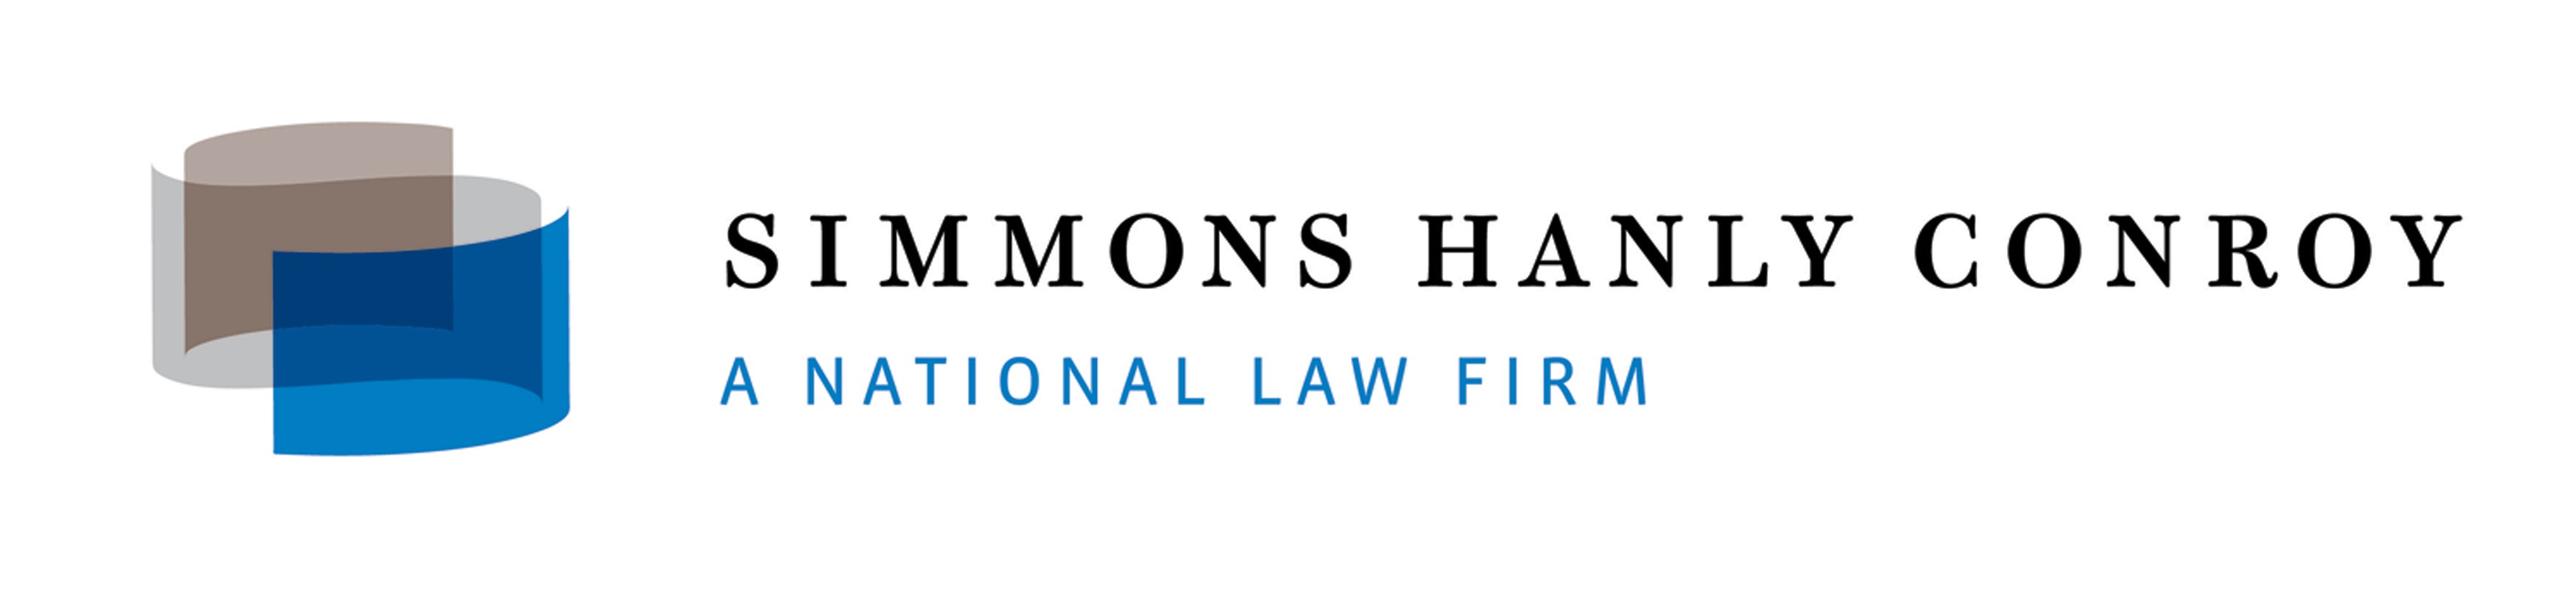 simmons law firm